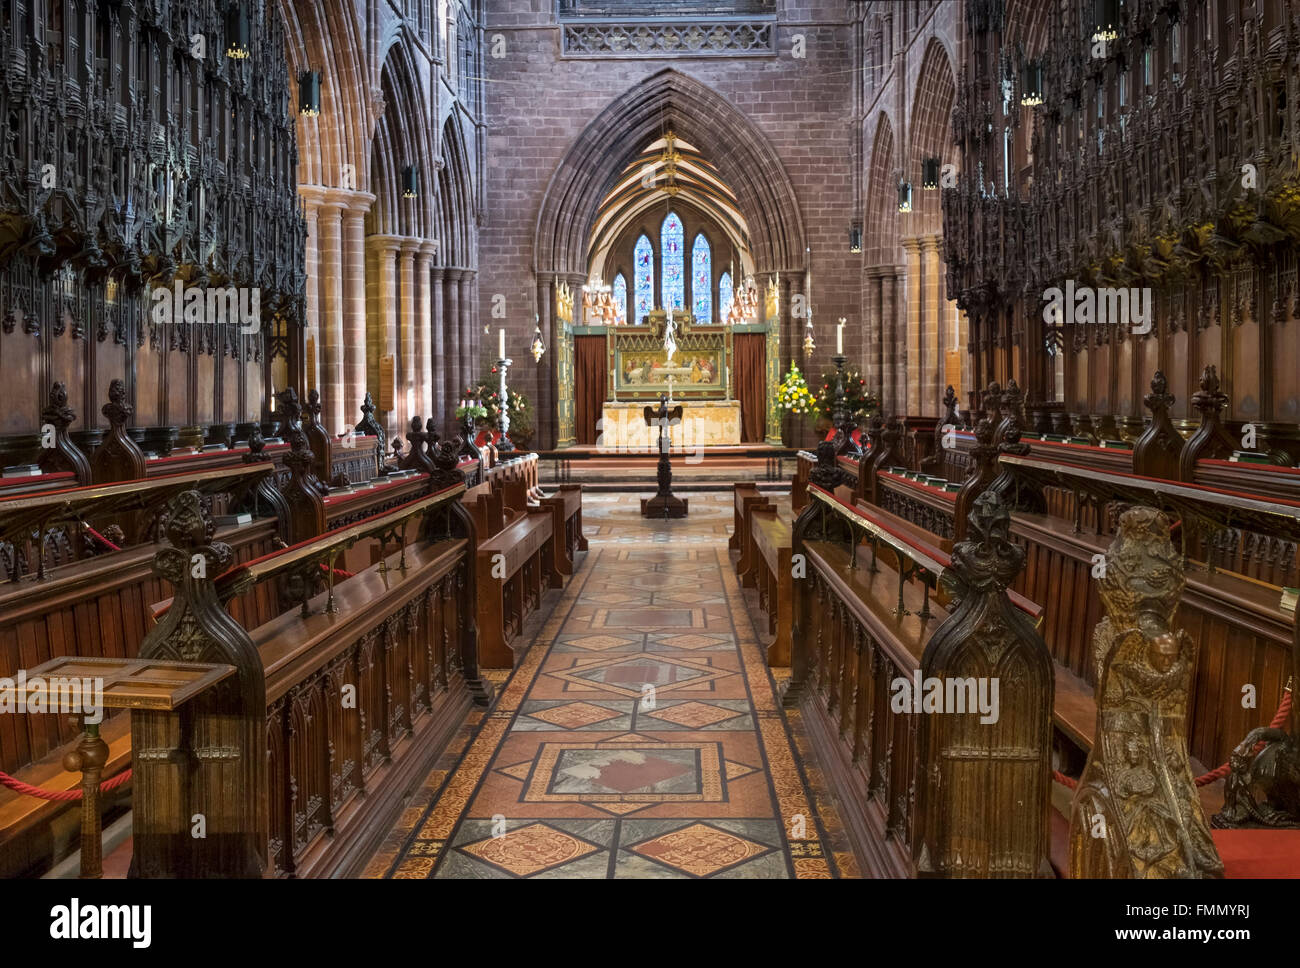 The Choir Stalls and Ornate Nave of Chester Cathedral, Chester, Cheshire, England, UK Stock Photo